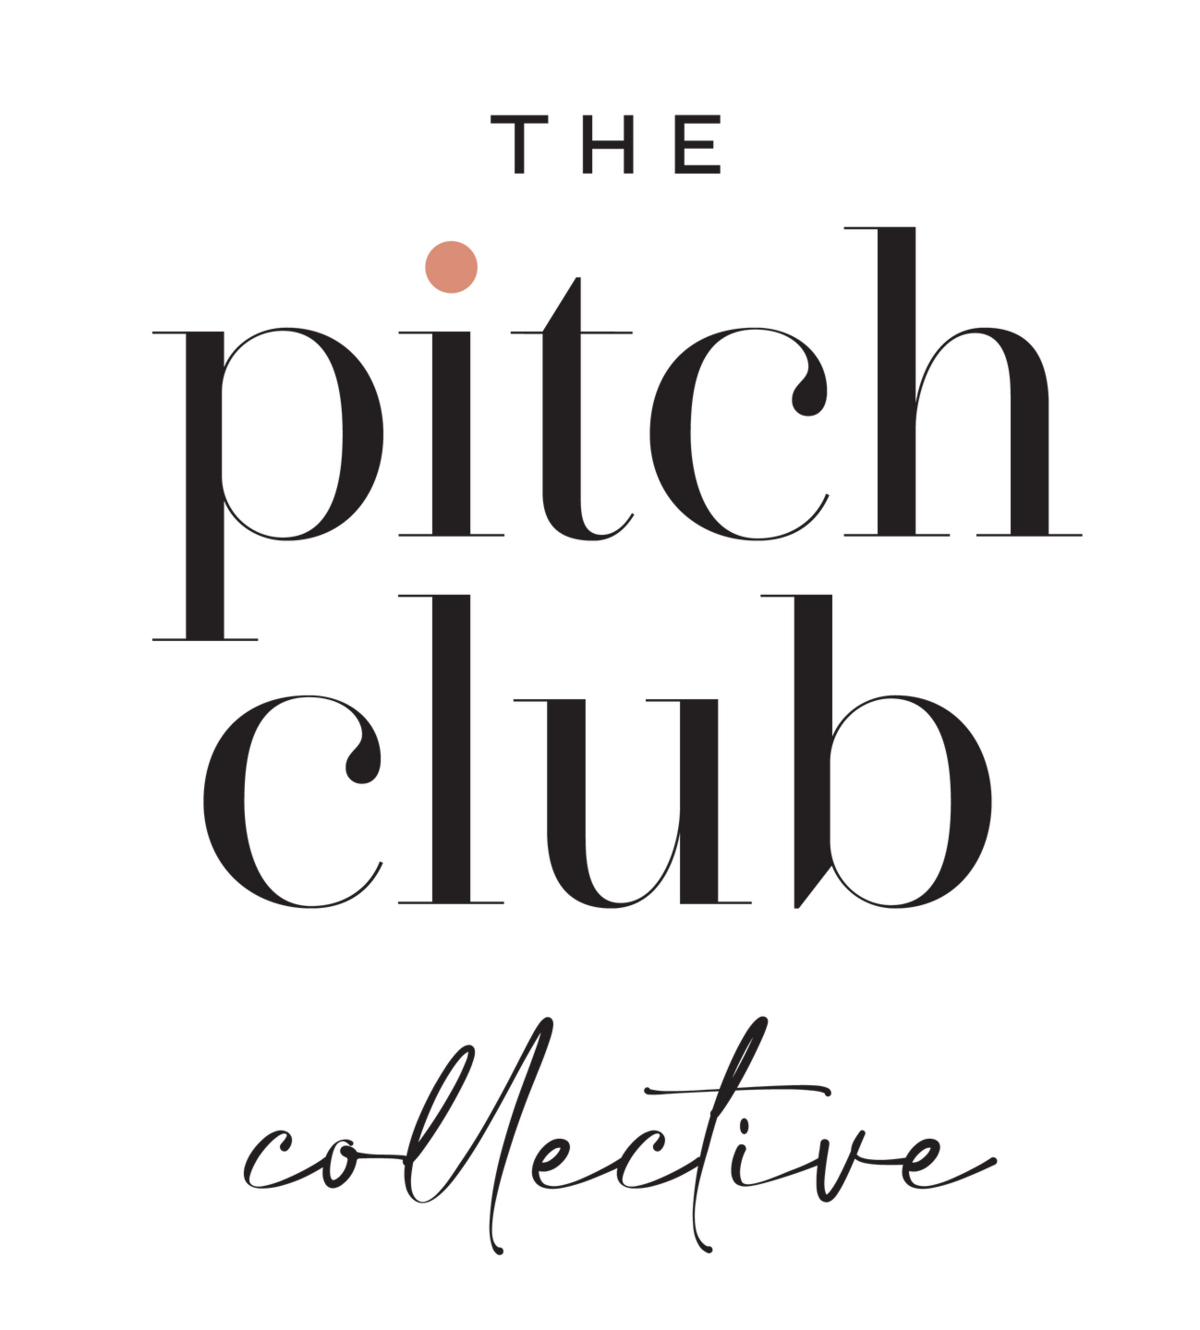 z1ATVuxbTYKIIZ4LhJPA_The_Pitch_Club_Collective